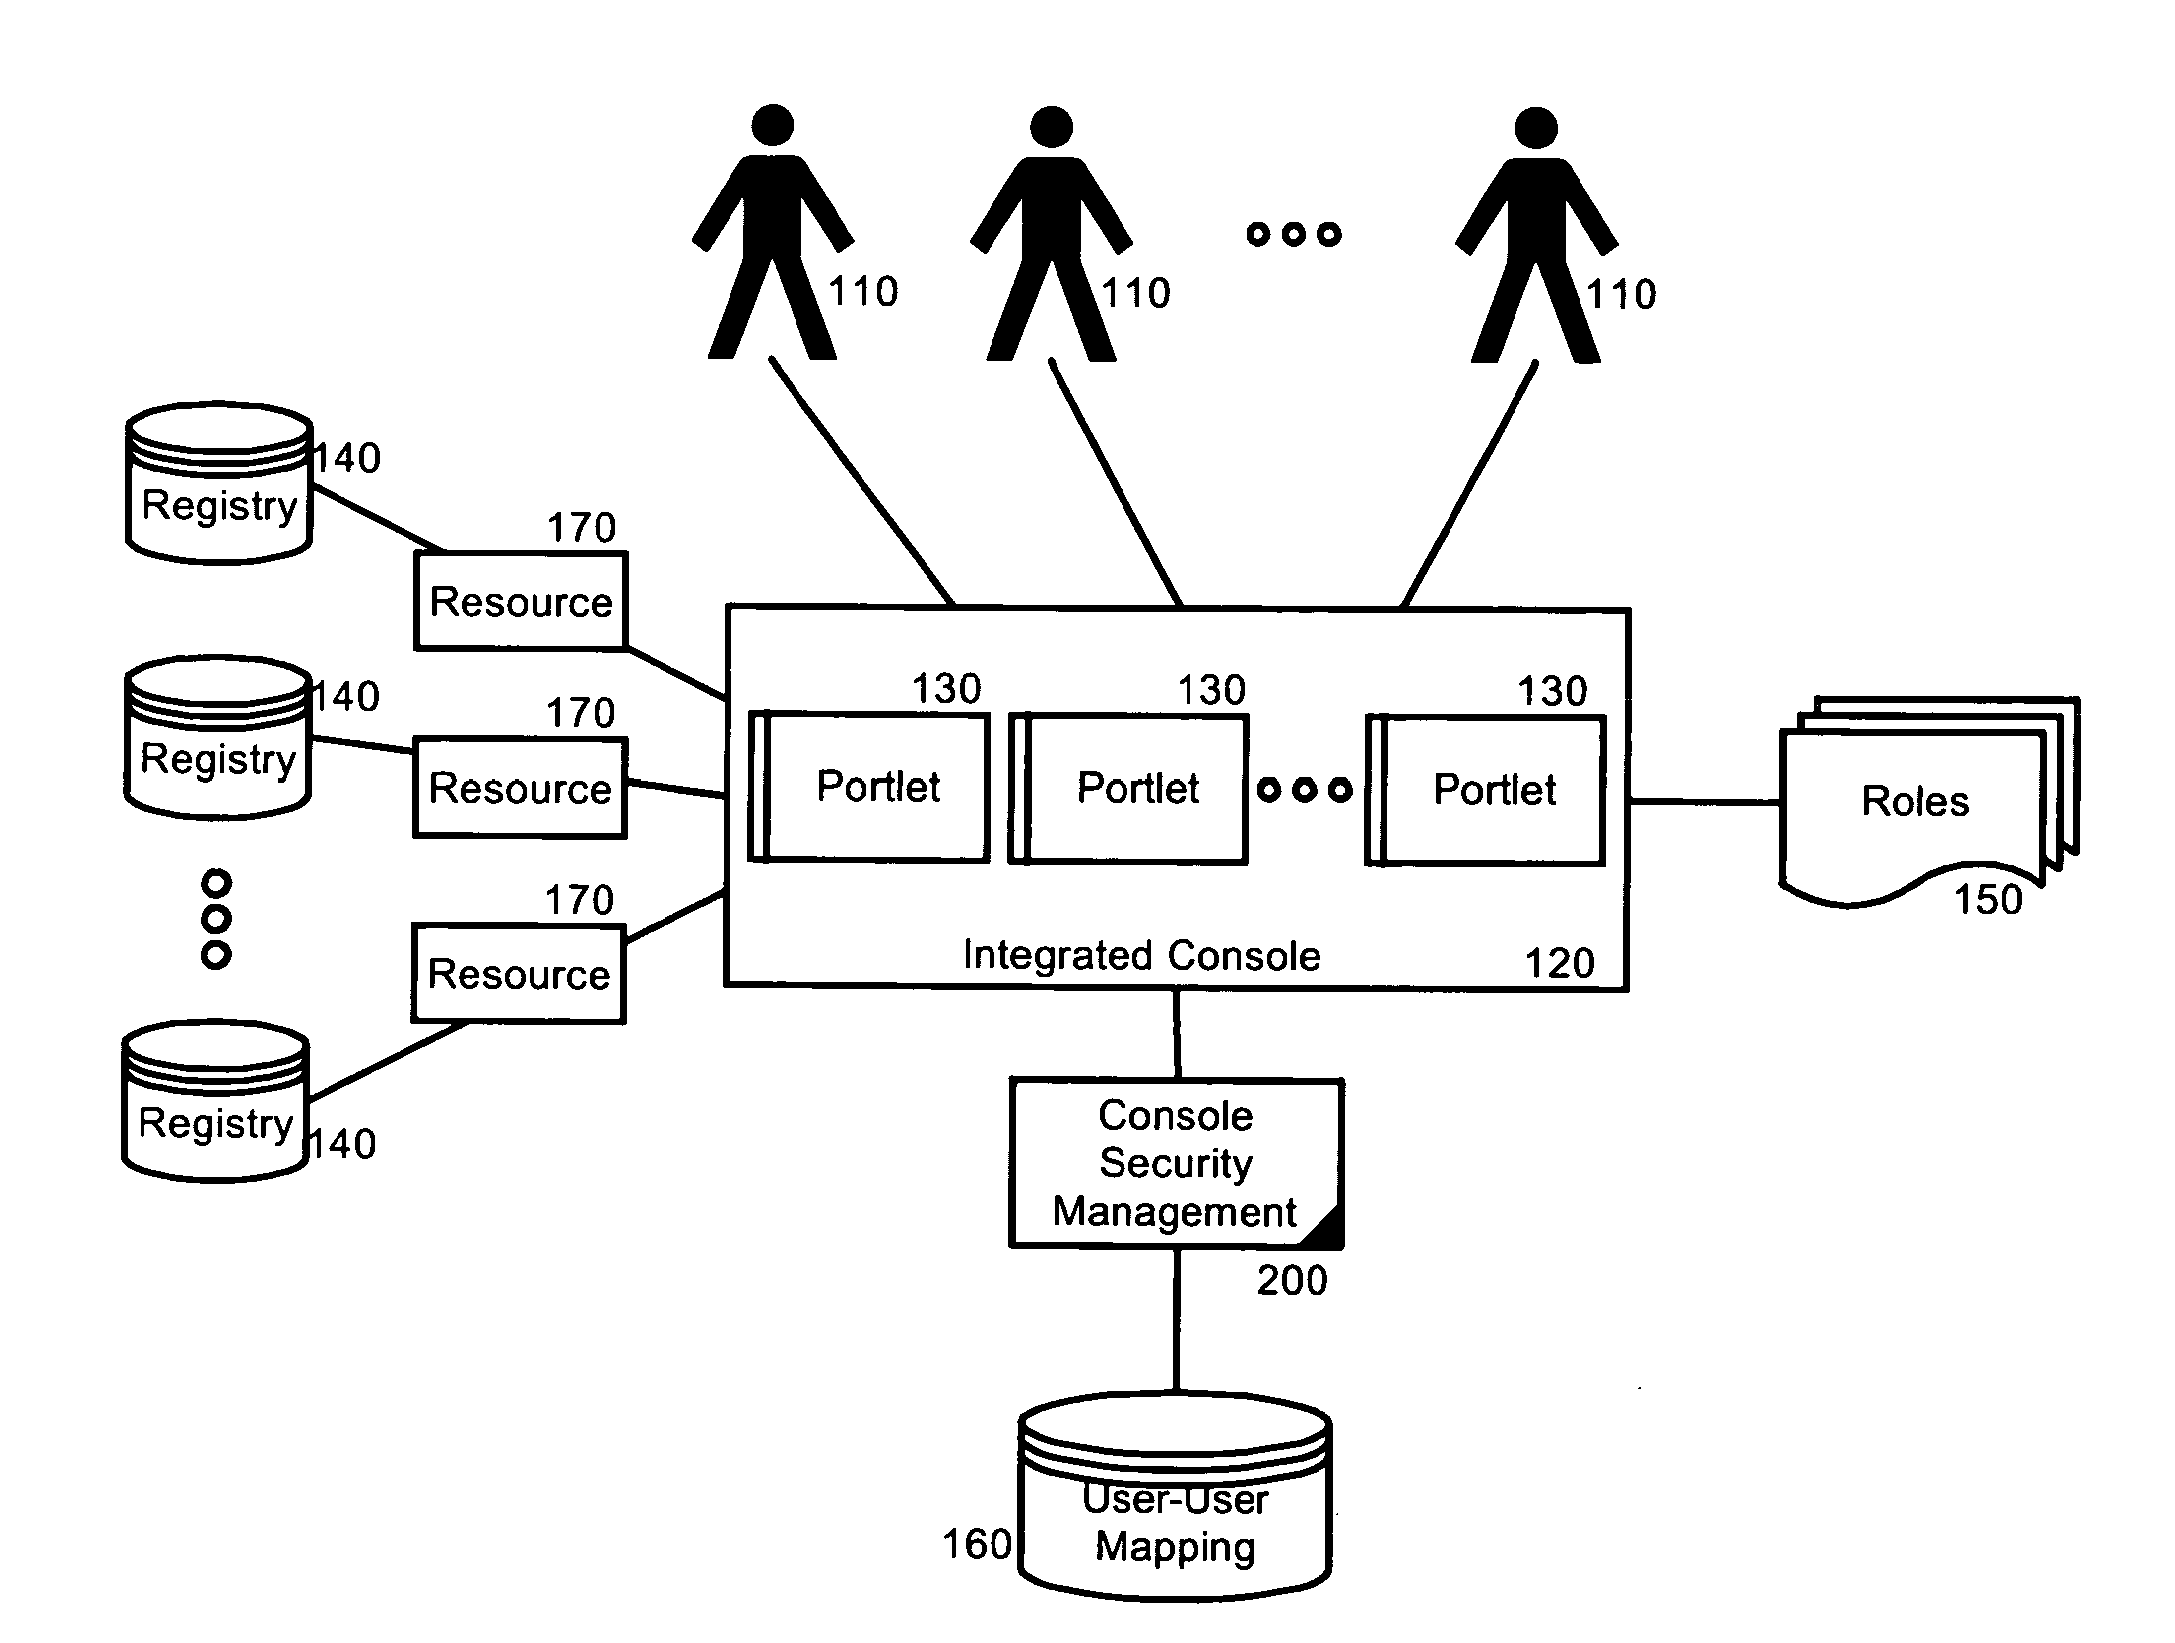 Security management for an integrated console for applications associated with multiple user registries